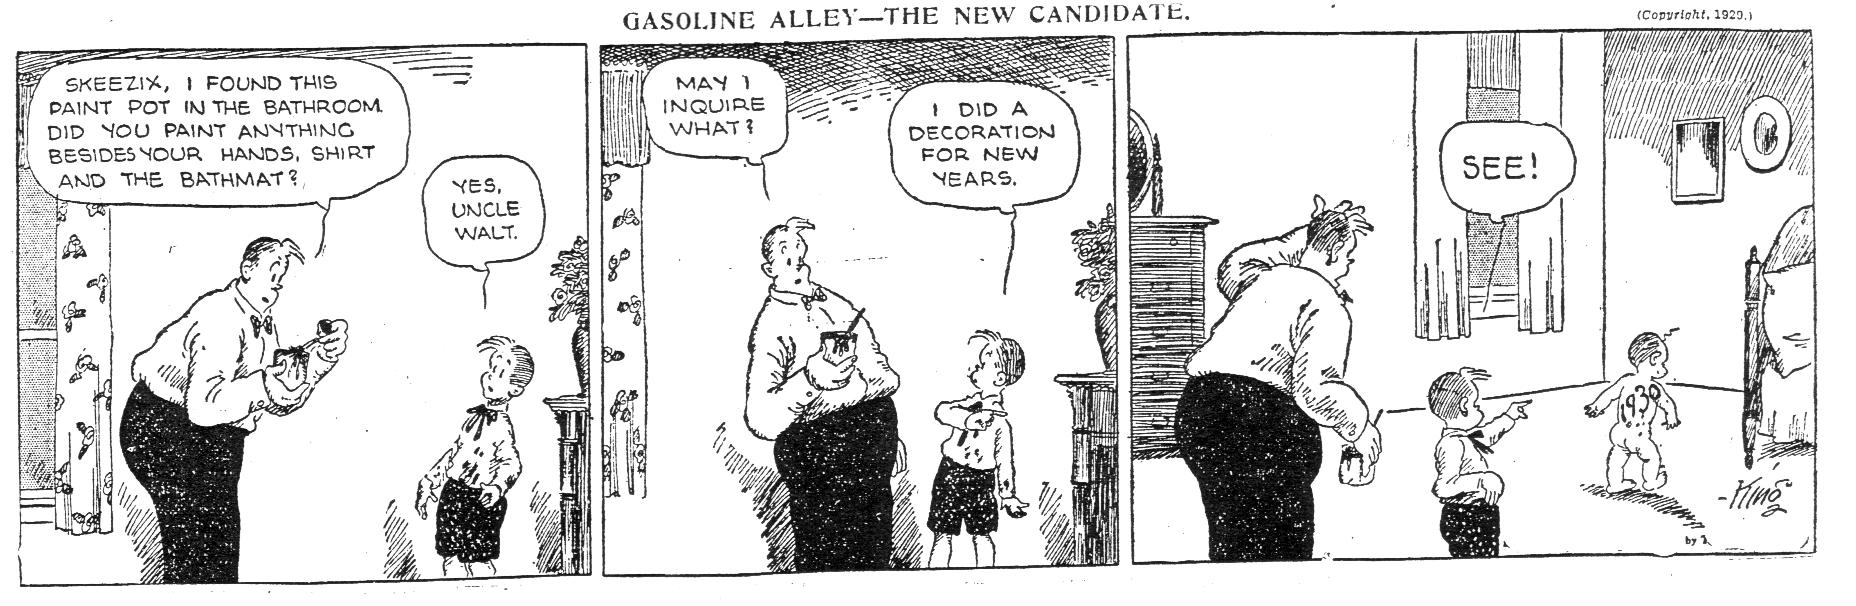 Comic Book Cover For Gasoline Alley 1930